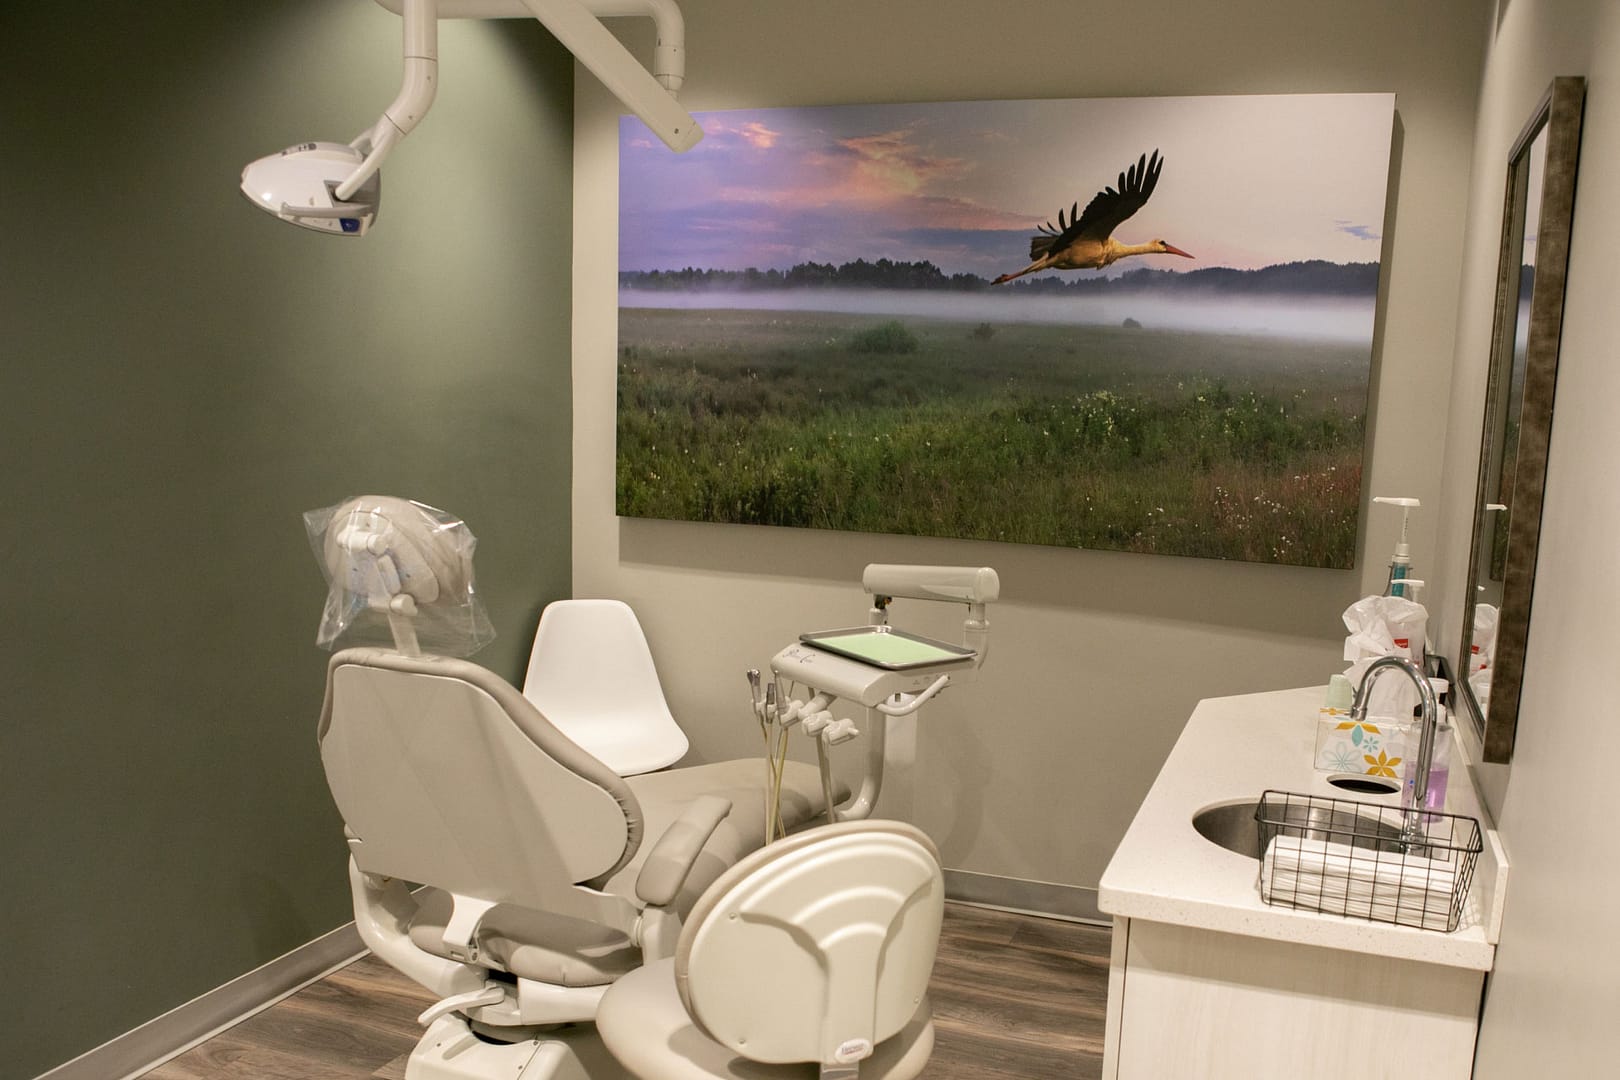 exam room with dental chair and equipment and large photo of flying crane on wall